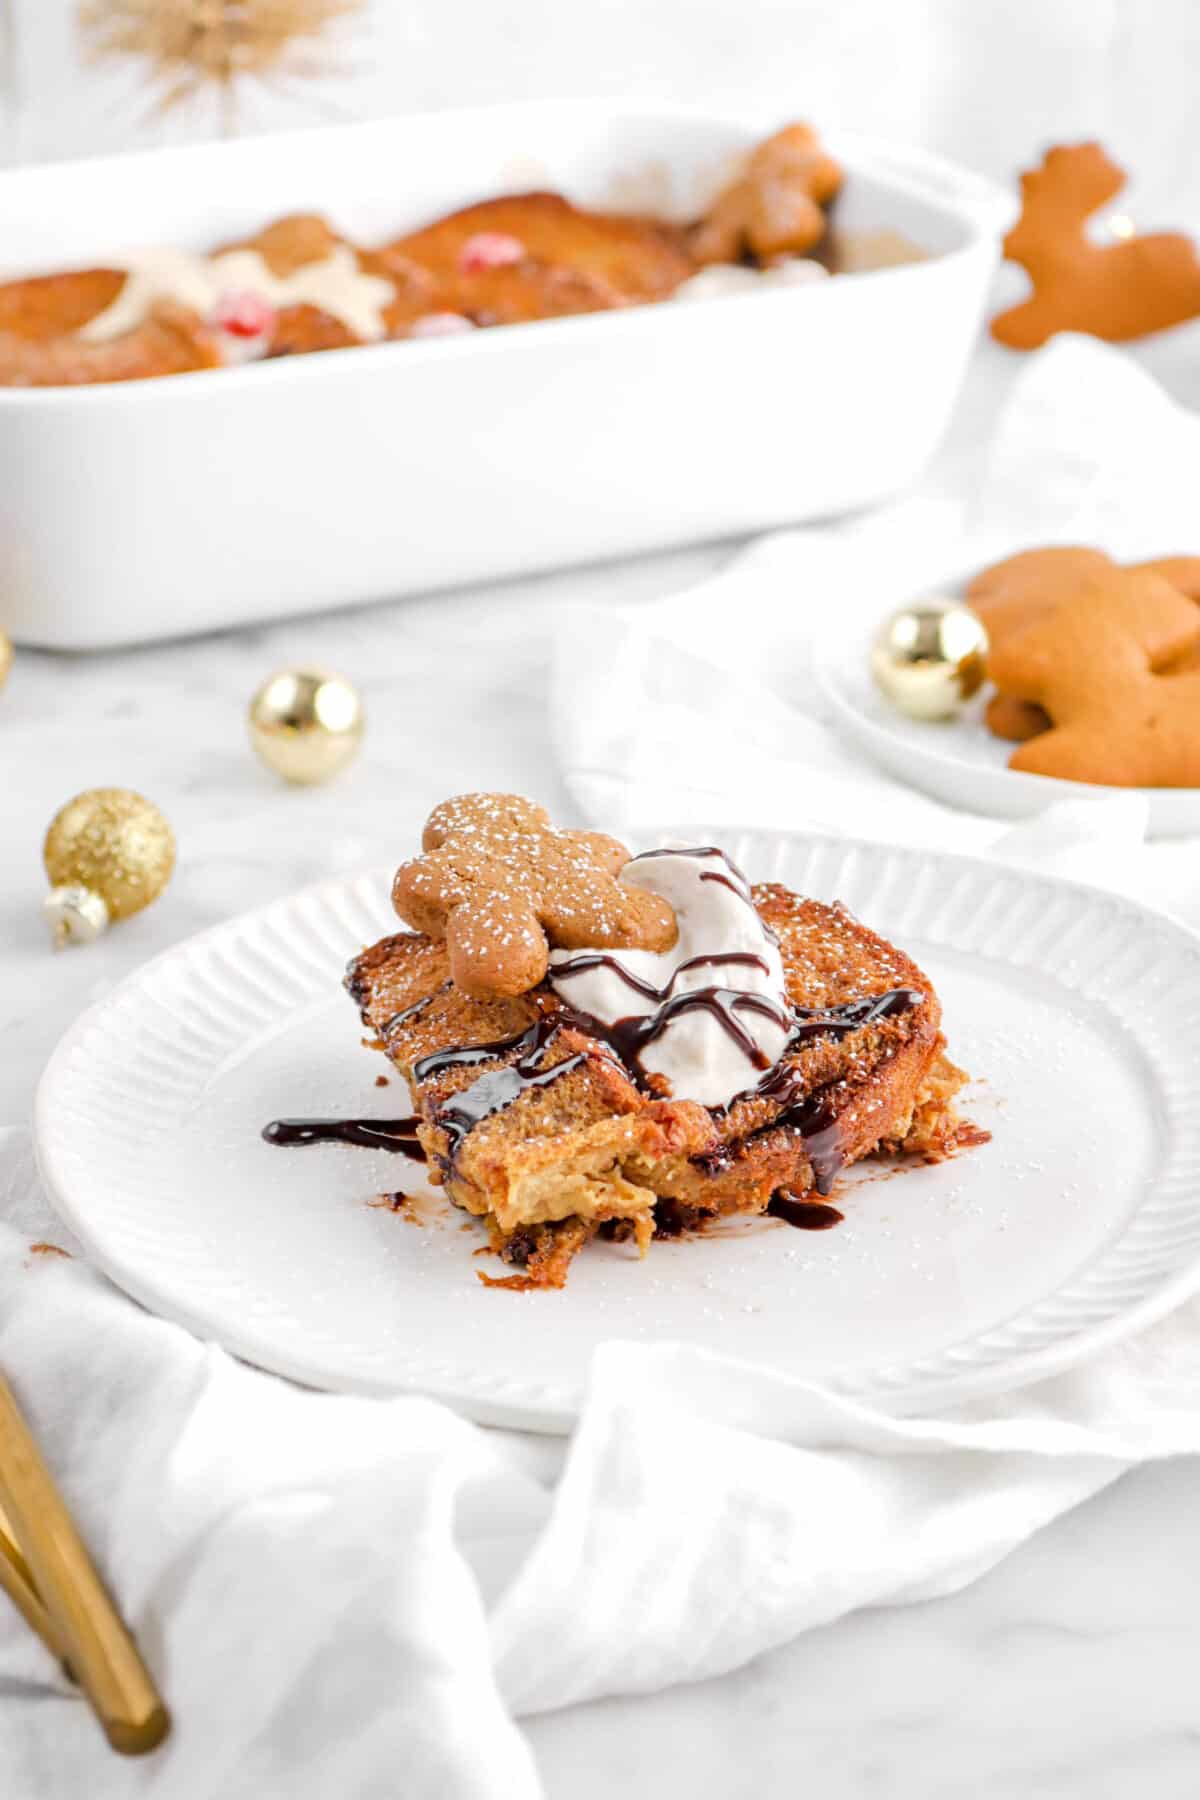 slice of gingerbread french toast on white plate with gold ornaments, cookies, and casserole behind